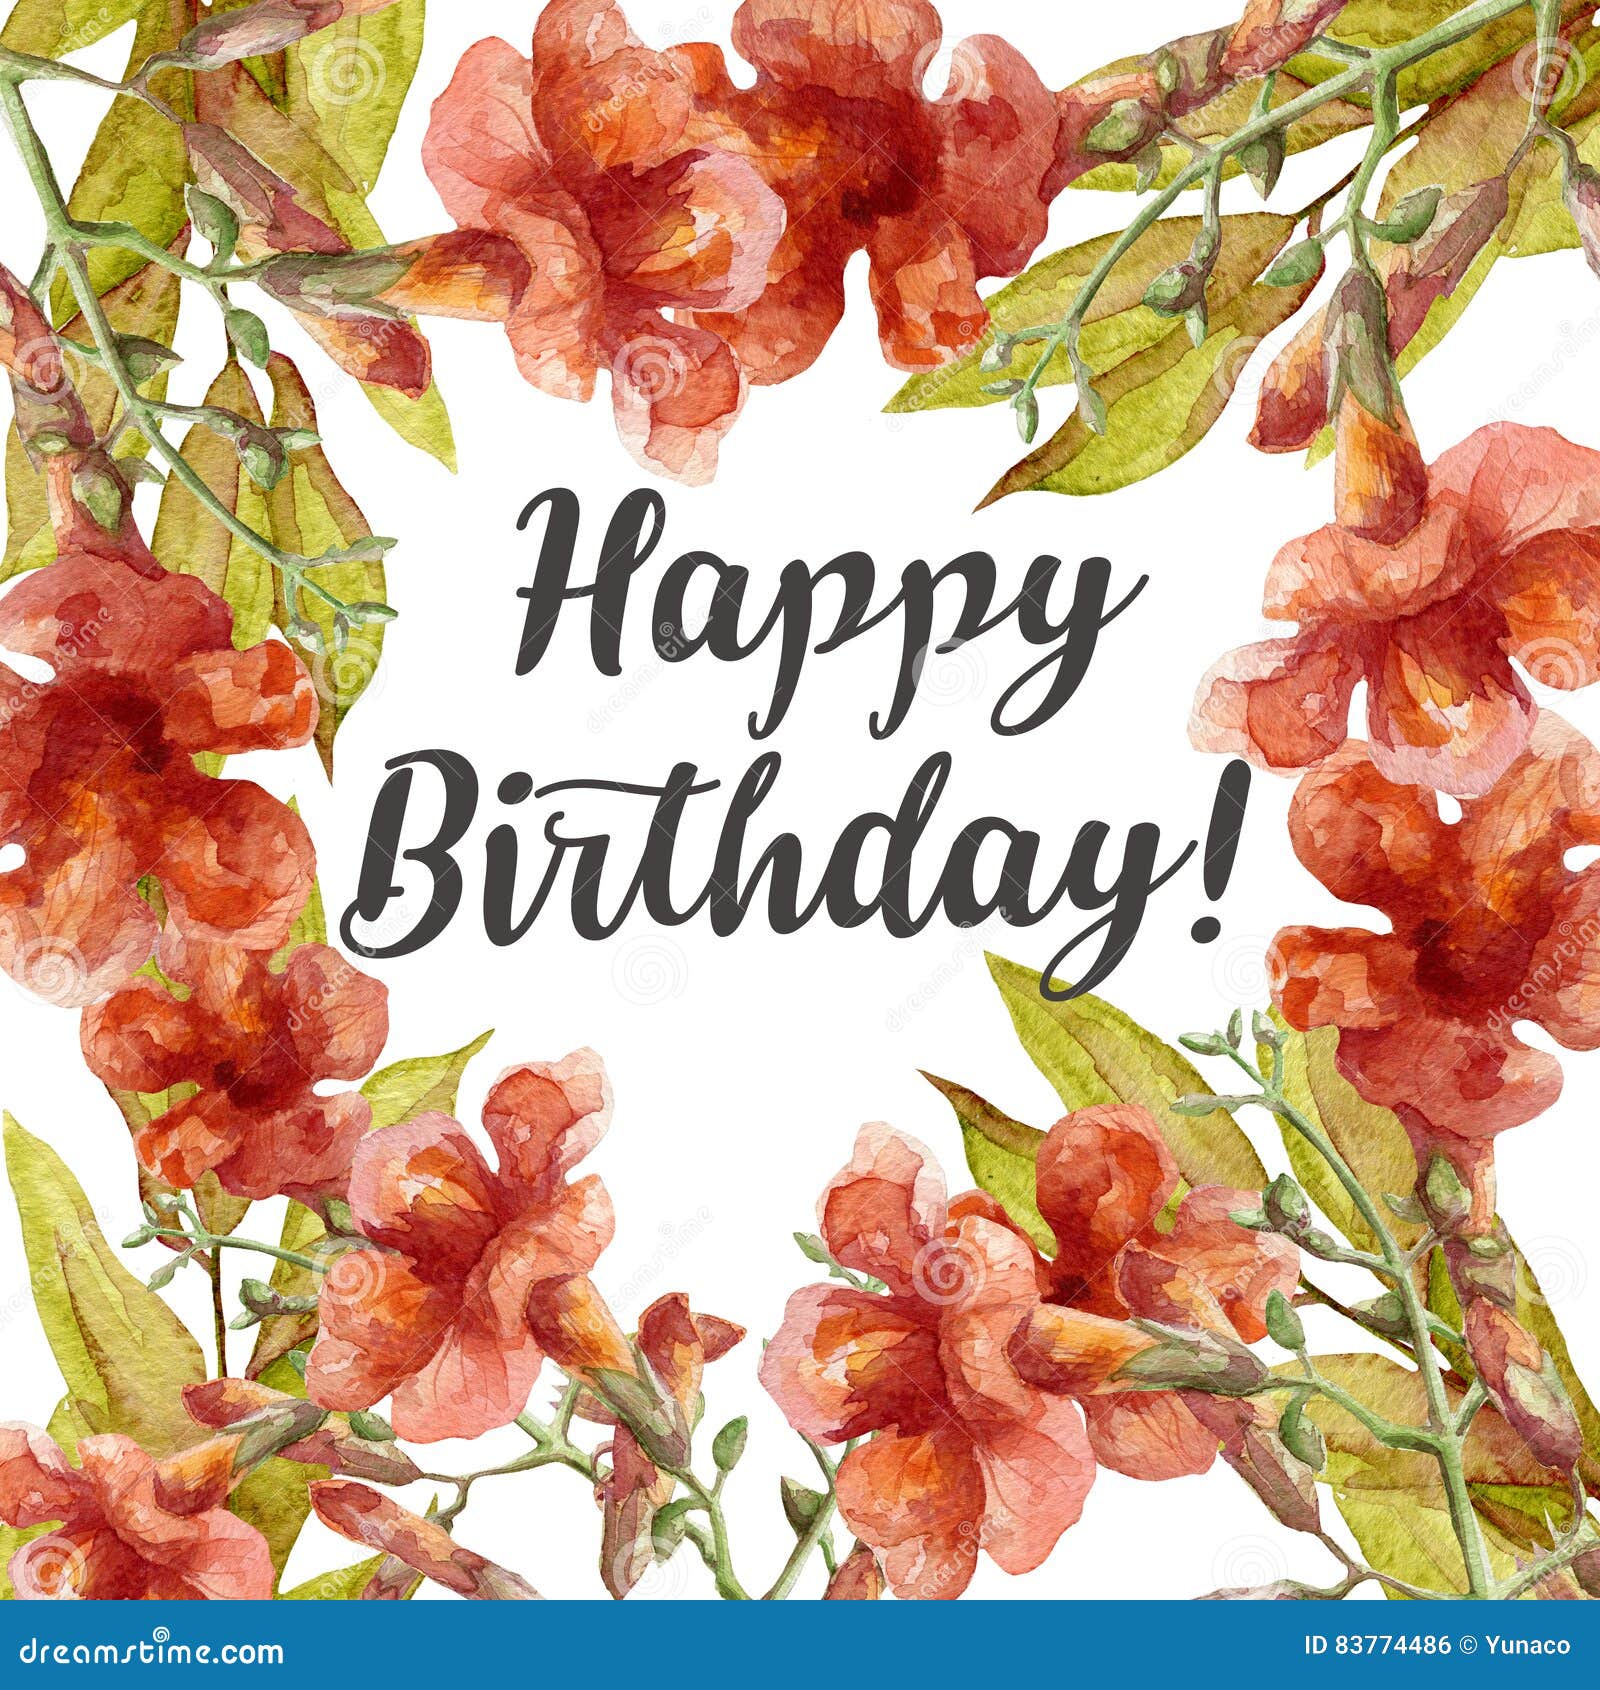 Happy Birthday Card with Watercolor Flowers Stock Illustration ...